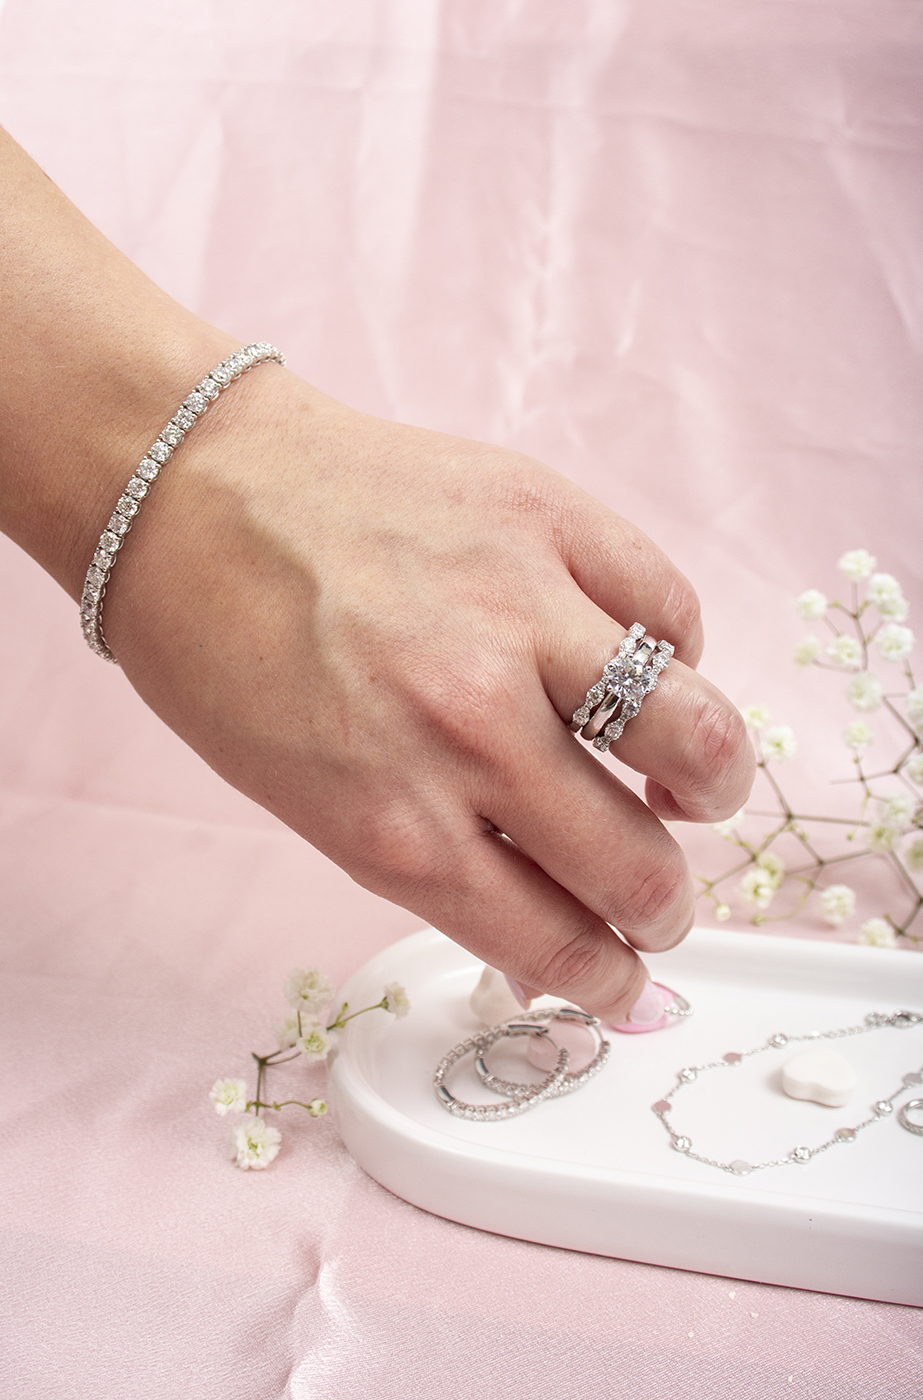 Ethical Natural Diamond Jeweler Rare & Forever  Supports Local Rochester Charity